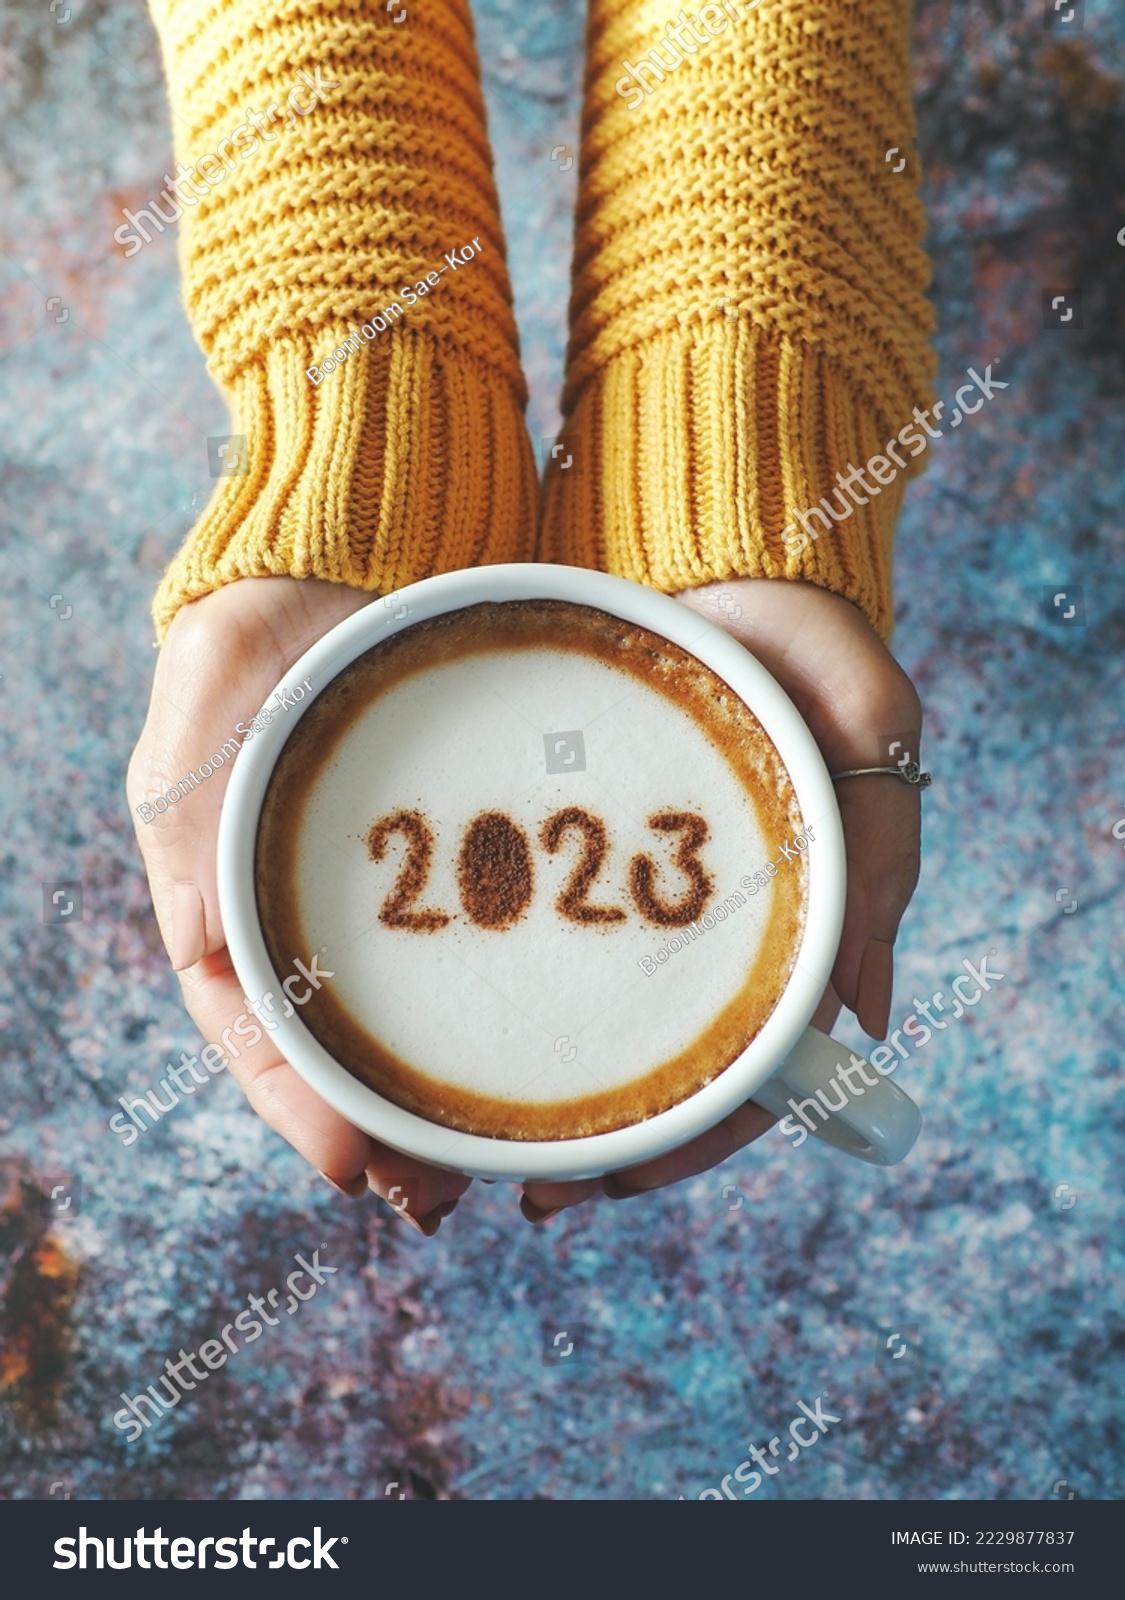 Happy New Year 2023 theme number 2023 on frothy surface of cappuccino served in white coffee mug holding by female hands over rustic blue background. Holidays food art, new year new you. (top view) #2229877837